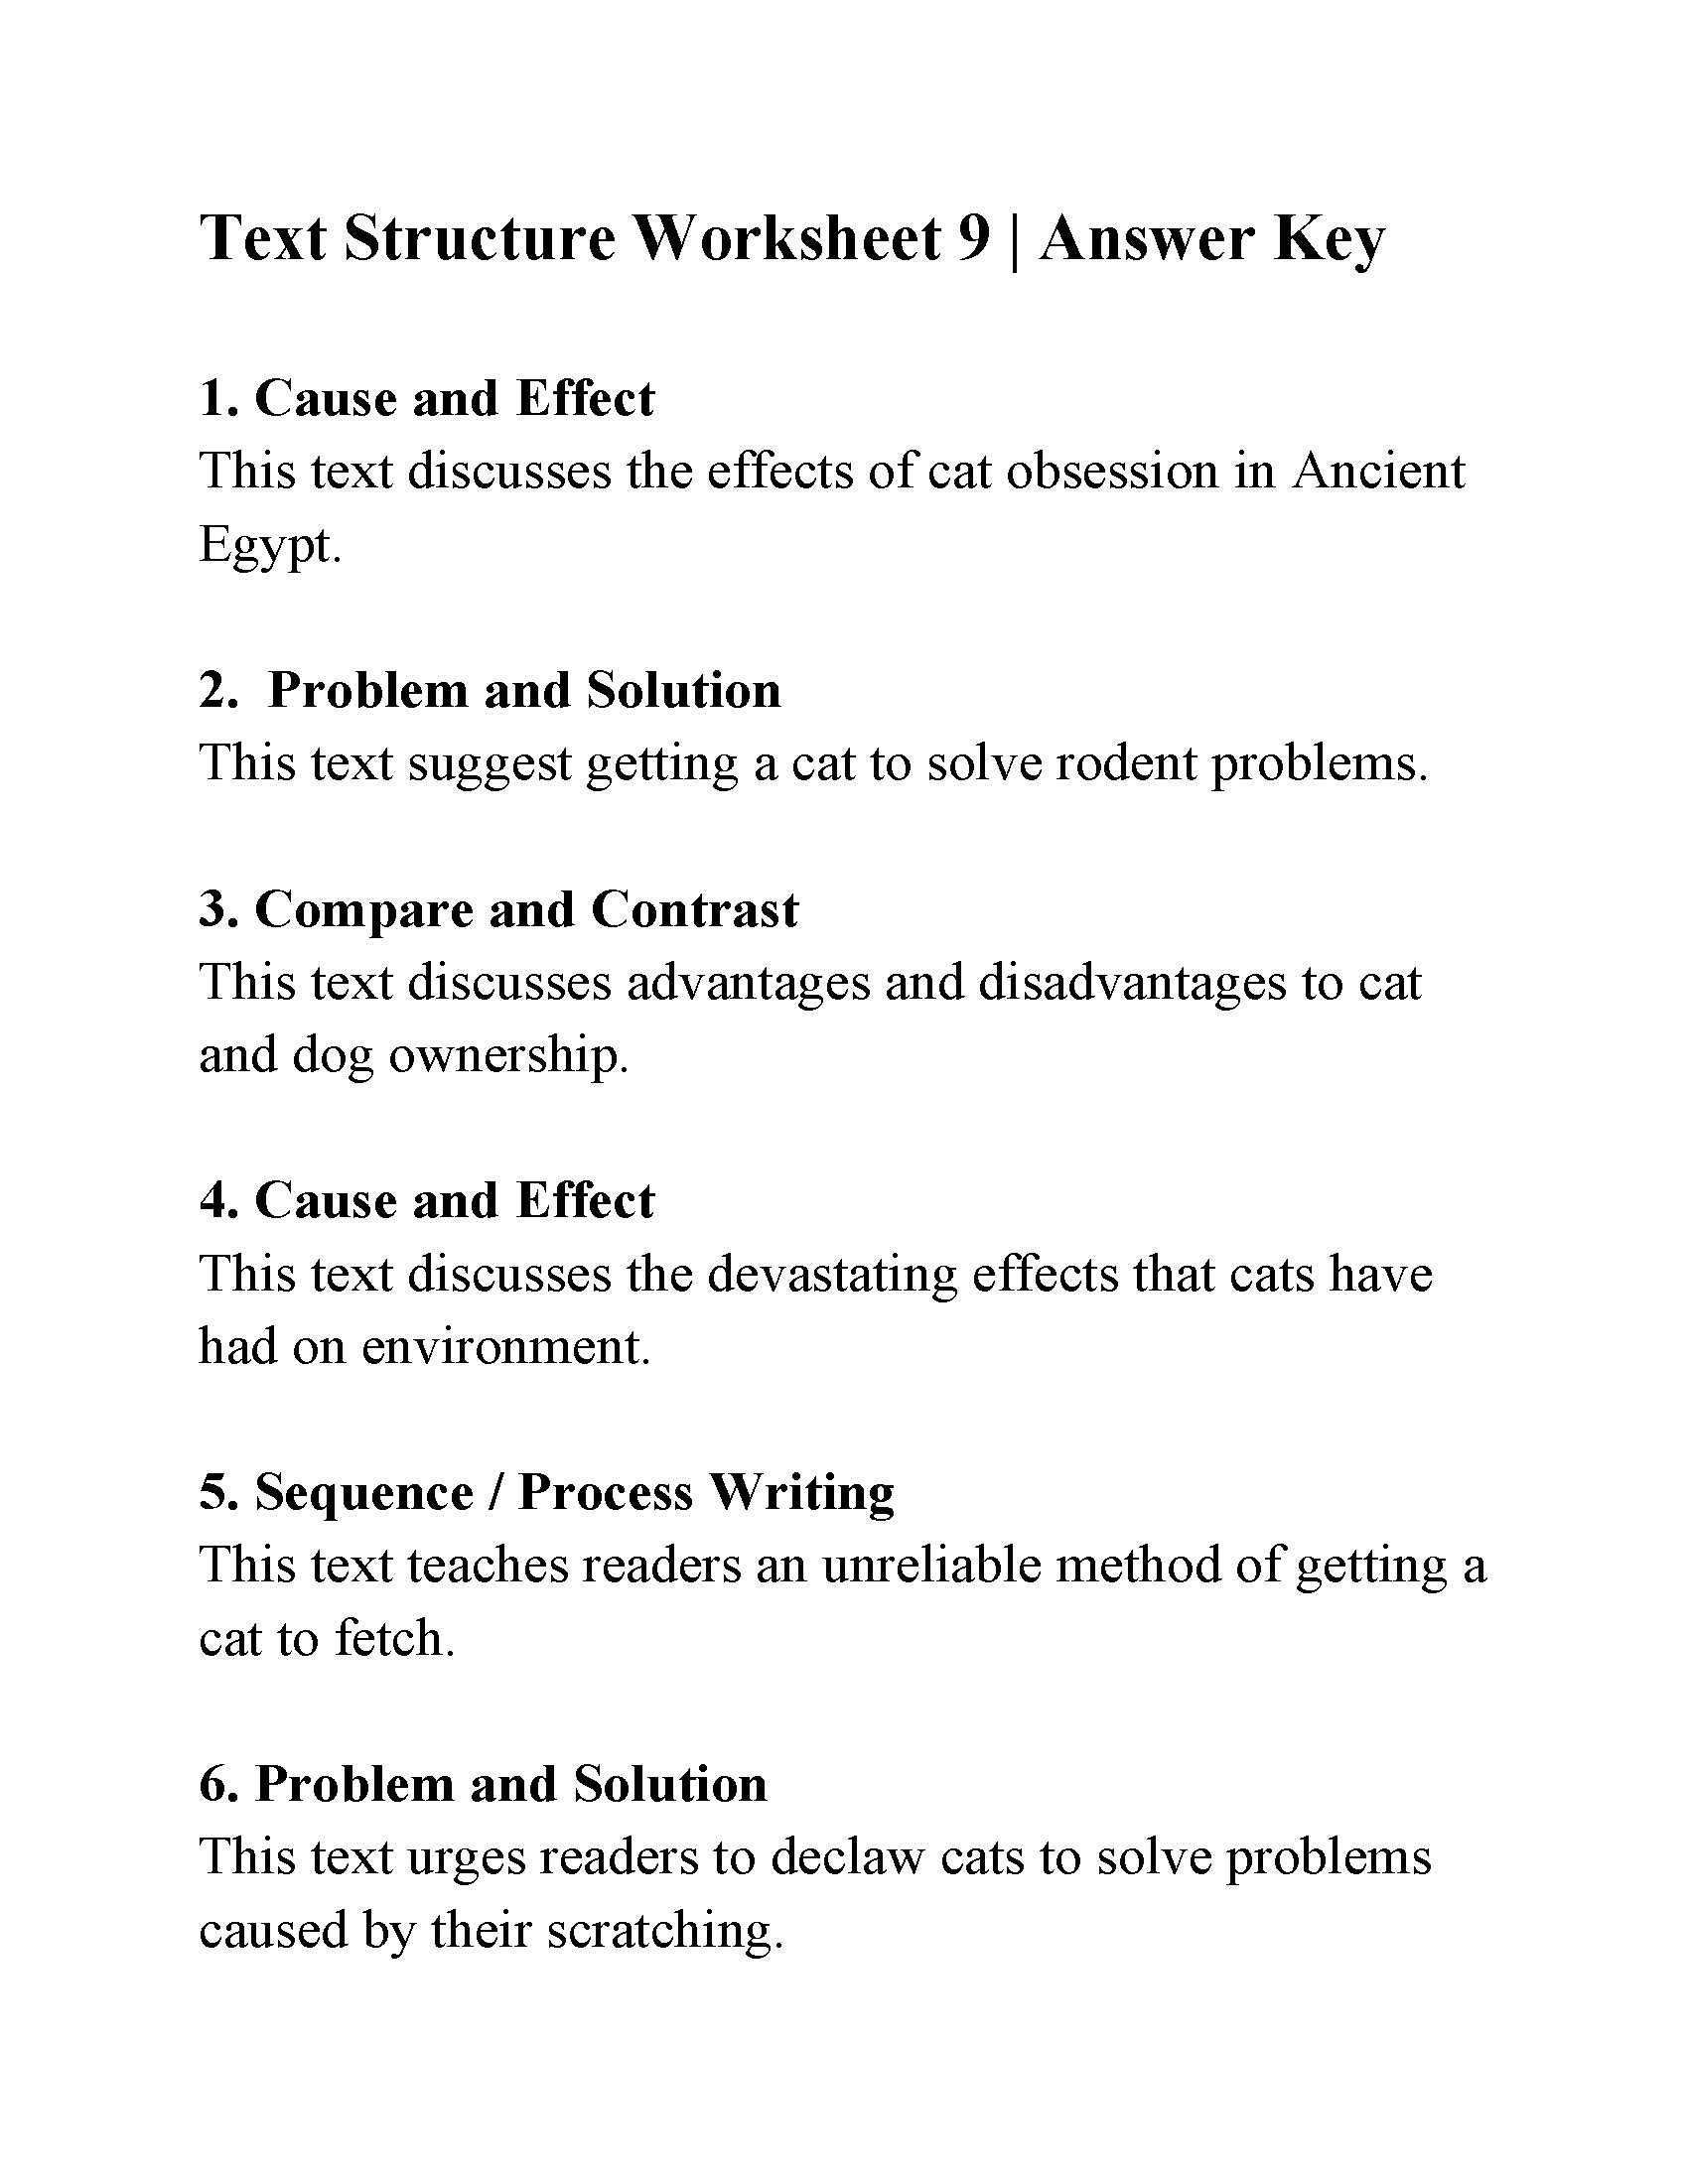 Text Structure Worksheet 4th Grade Text Structure Worksheet 9